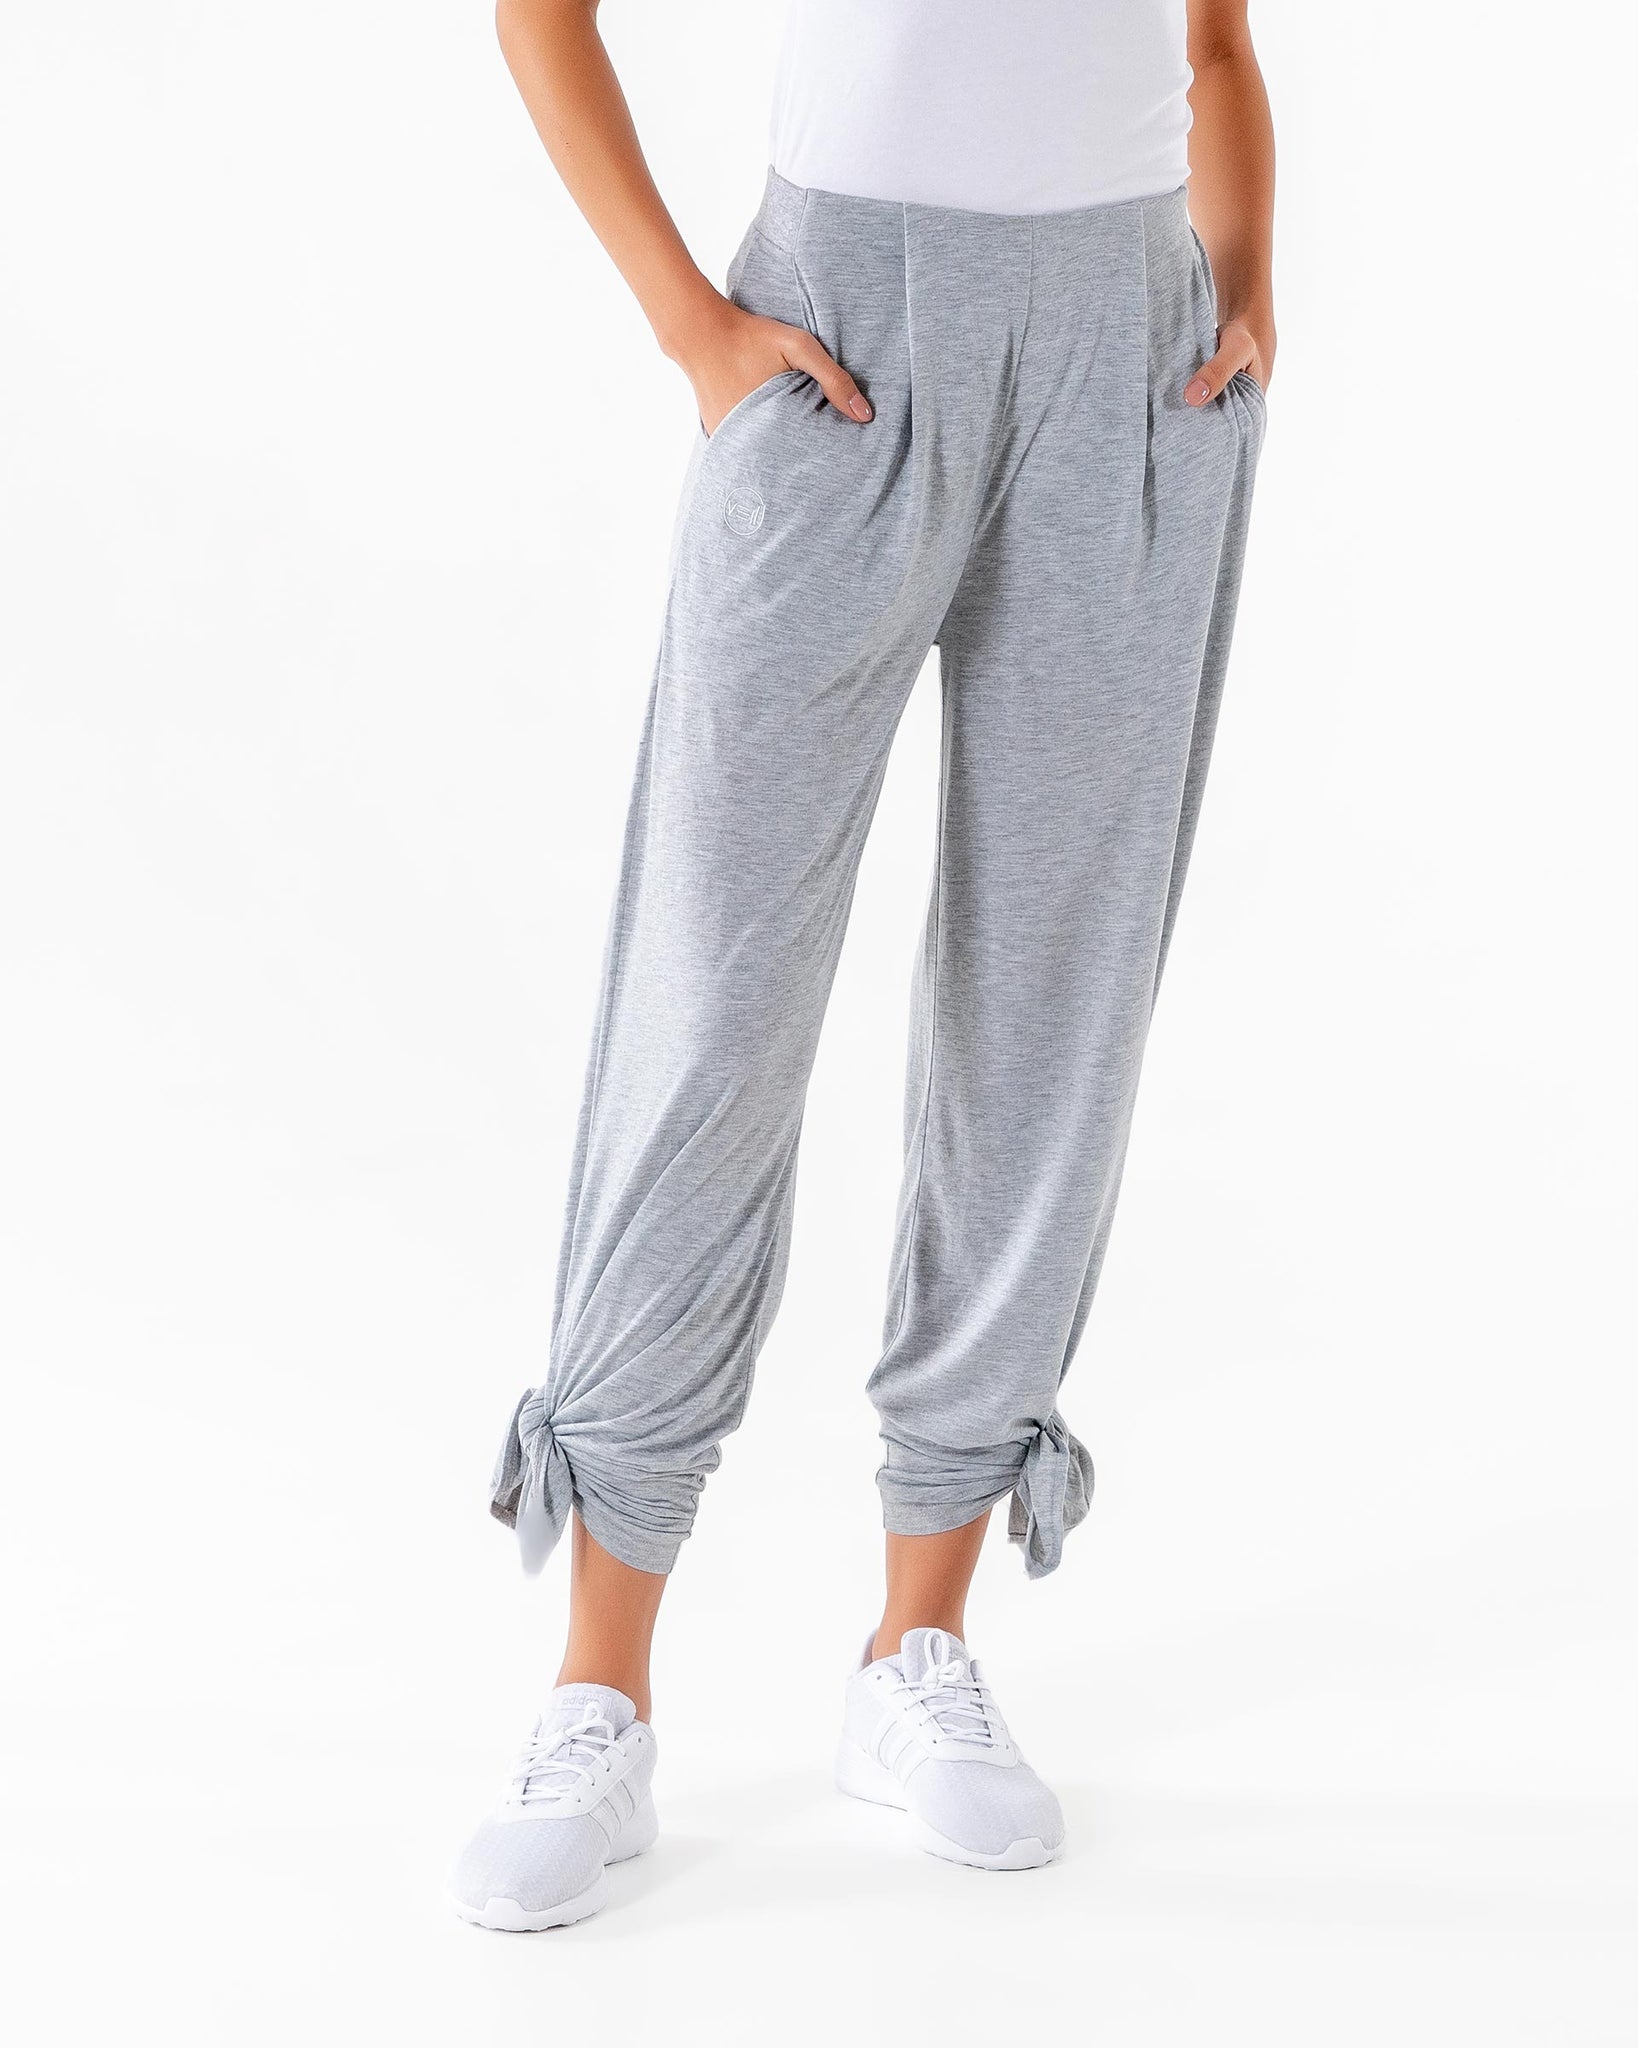 Swift Wide-Leg Sweatpant in light grey by Veil Garments. Modest activewear collection.